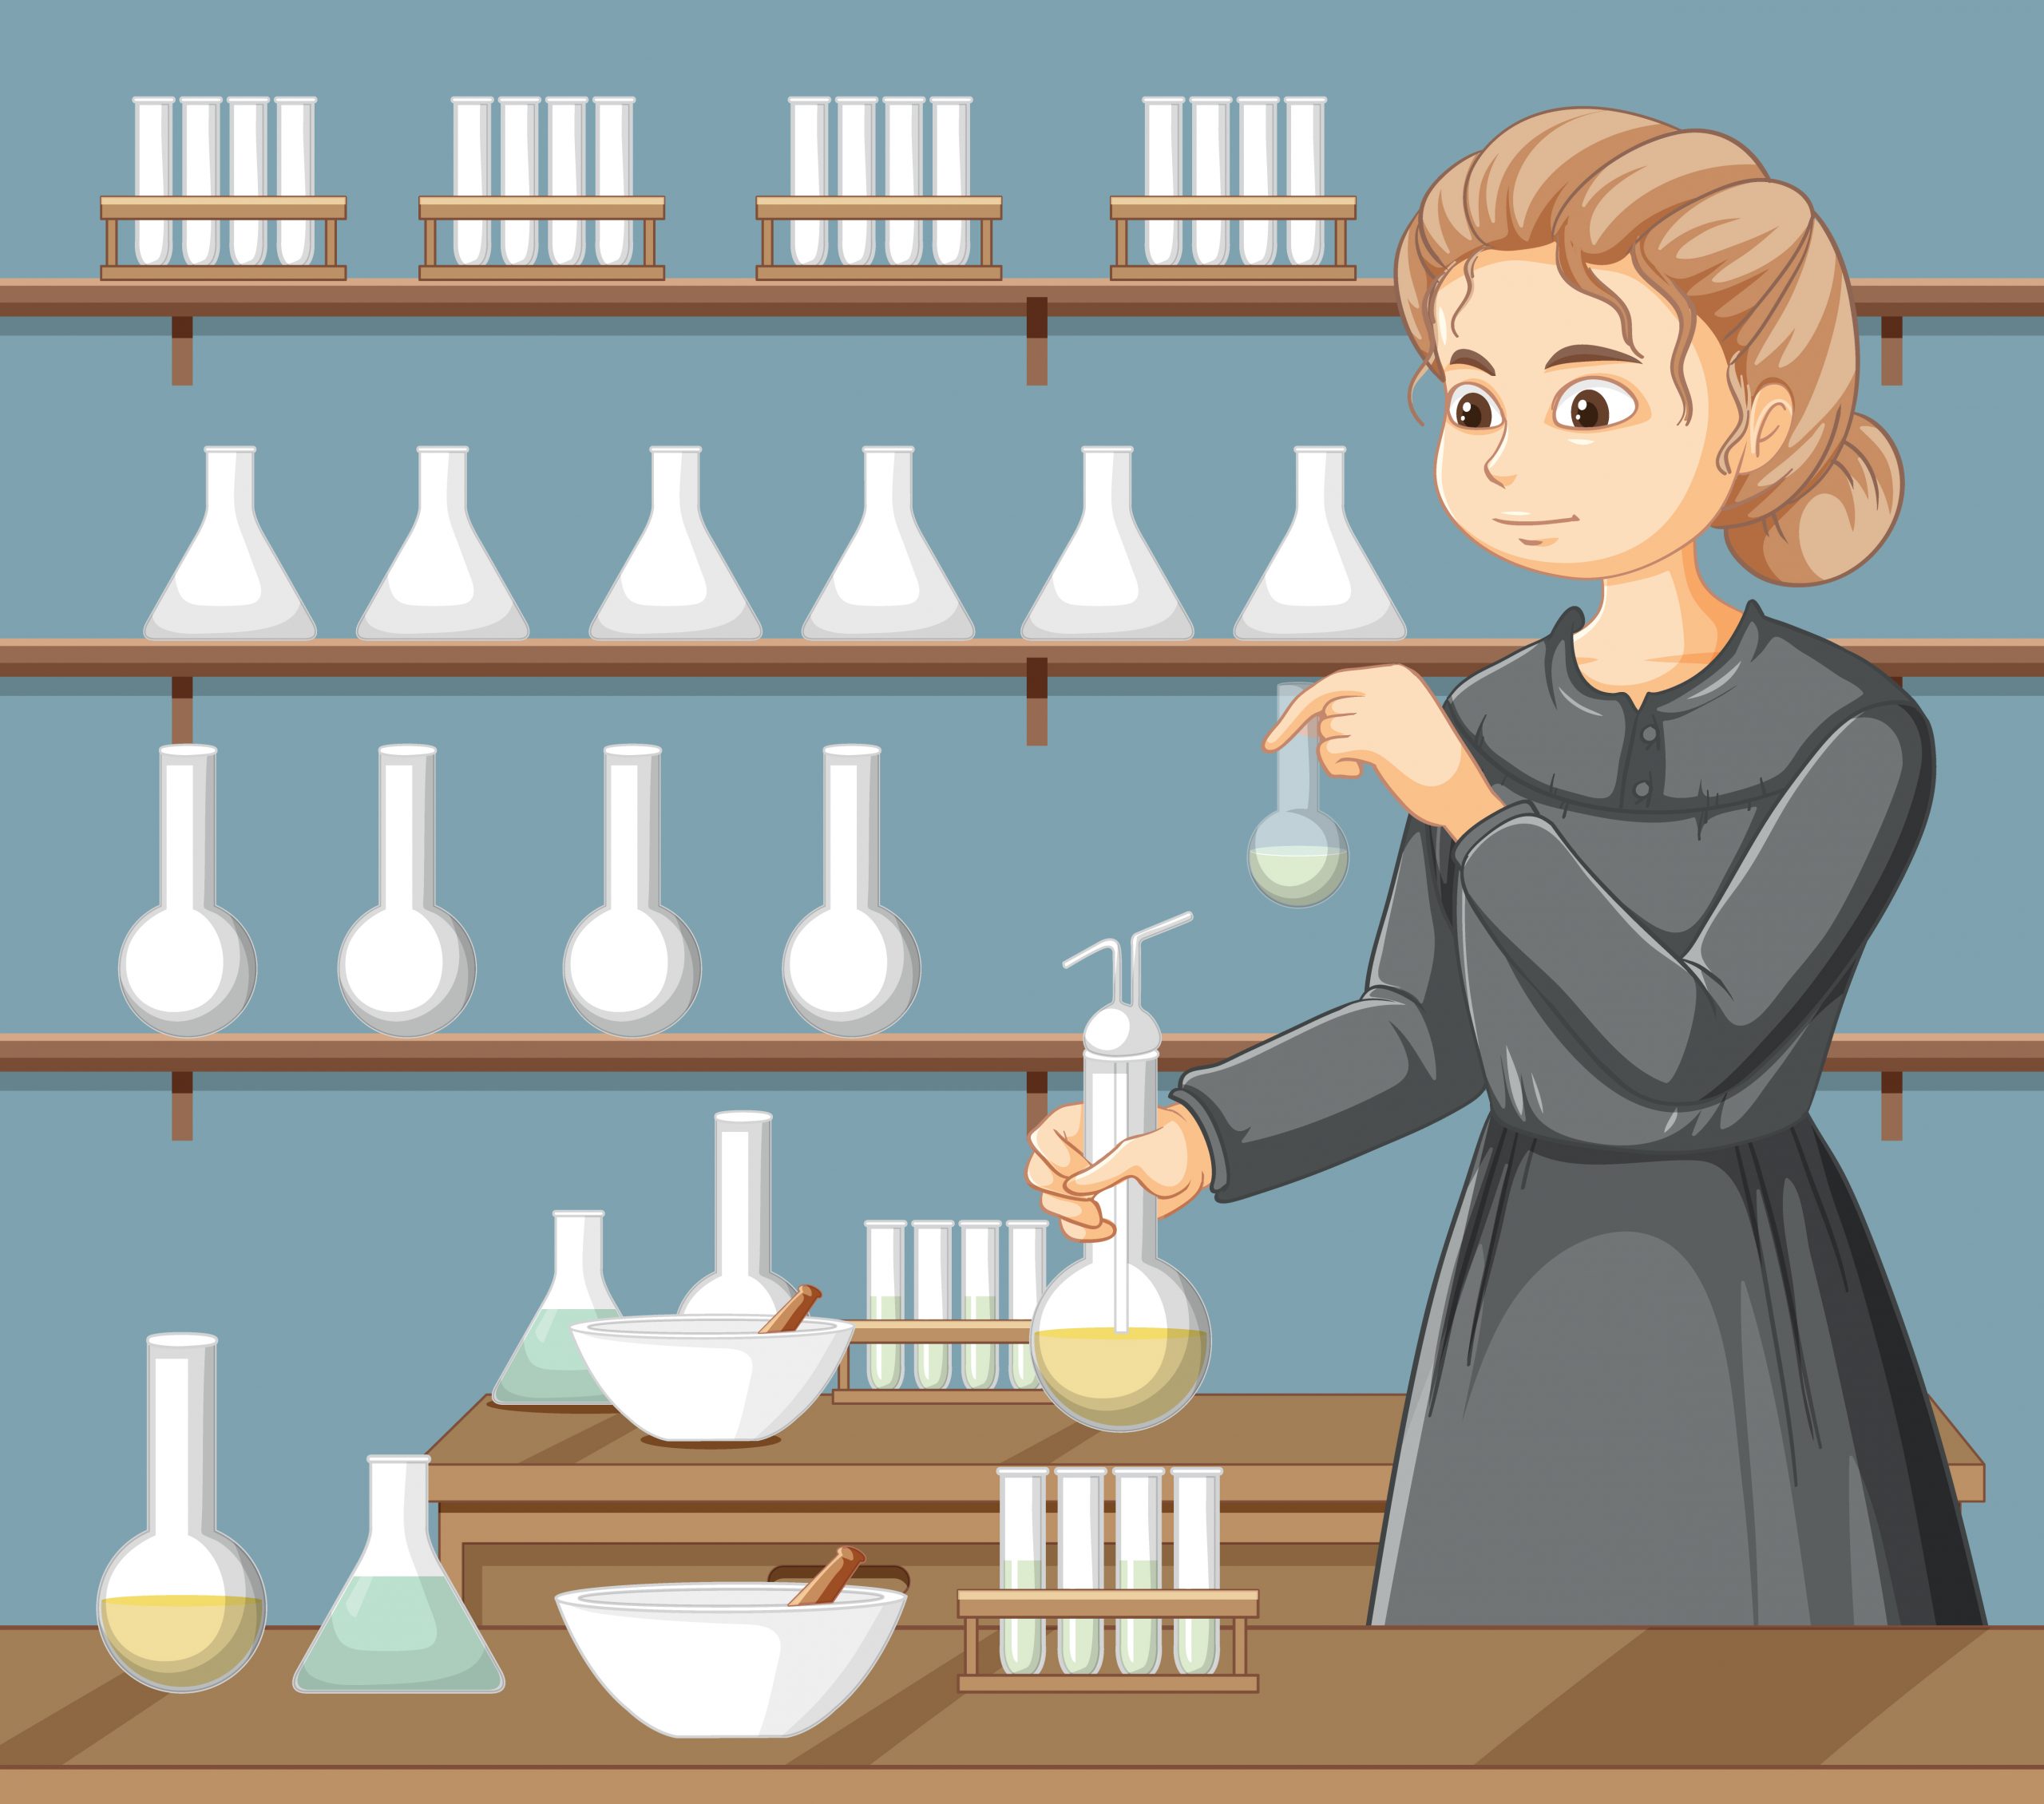 Portrait of Marie Curie in cartoon style